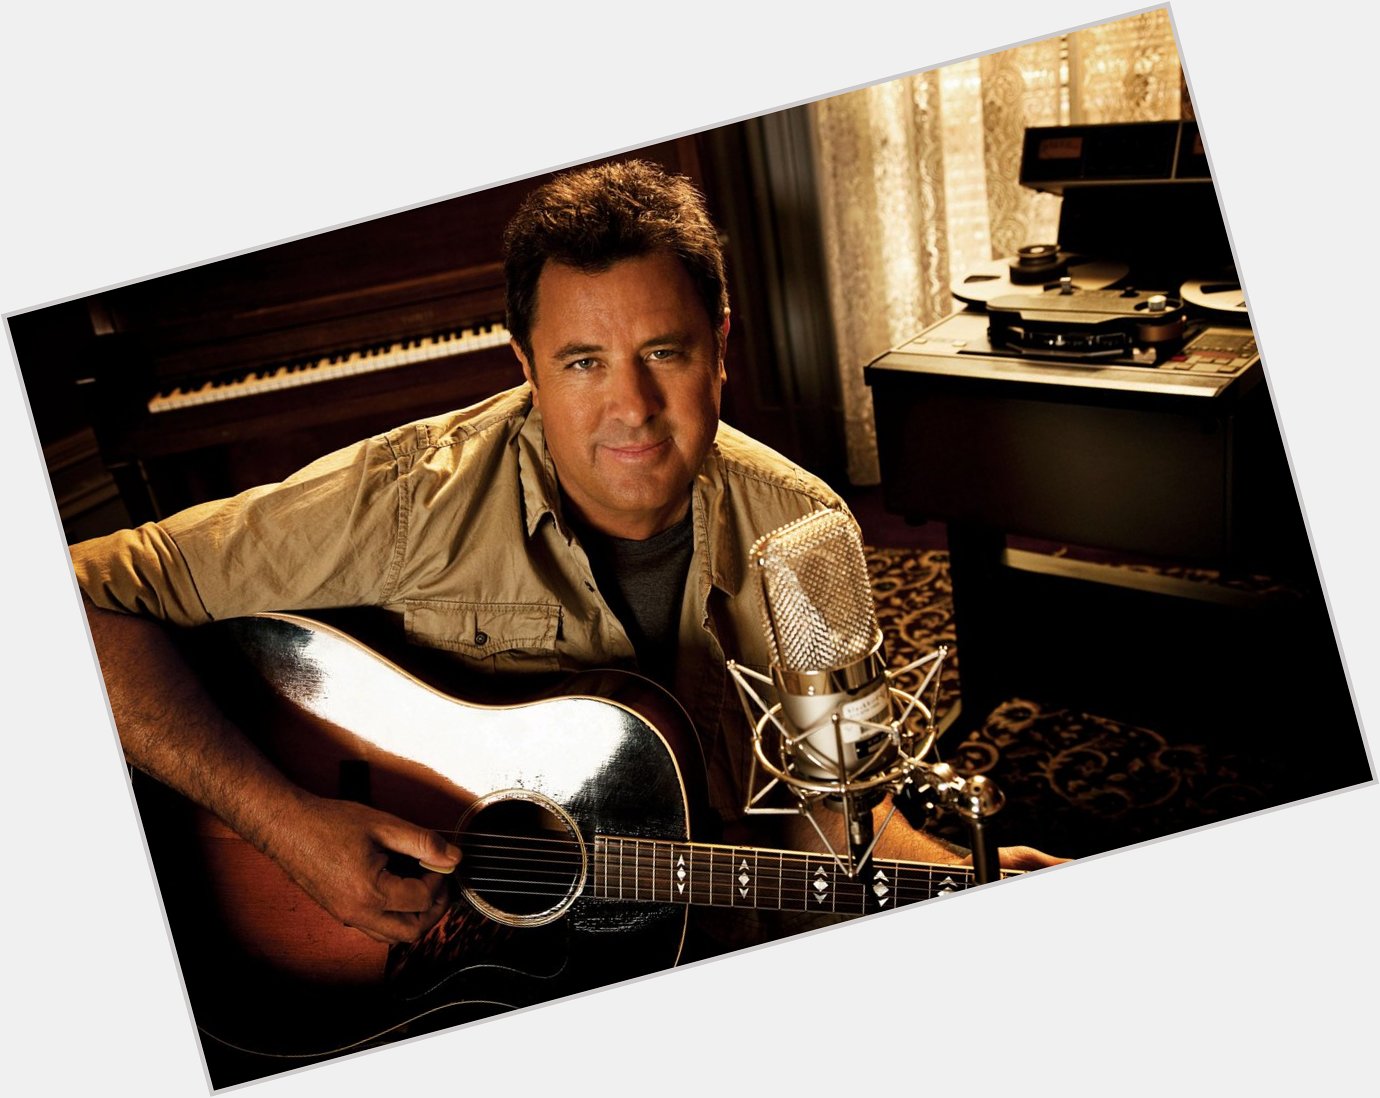 Vince Gill was in 1957 in Norman, OK. Happy Birthday Vince! 